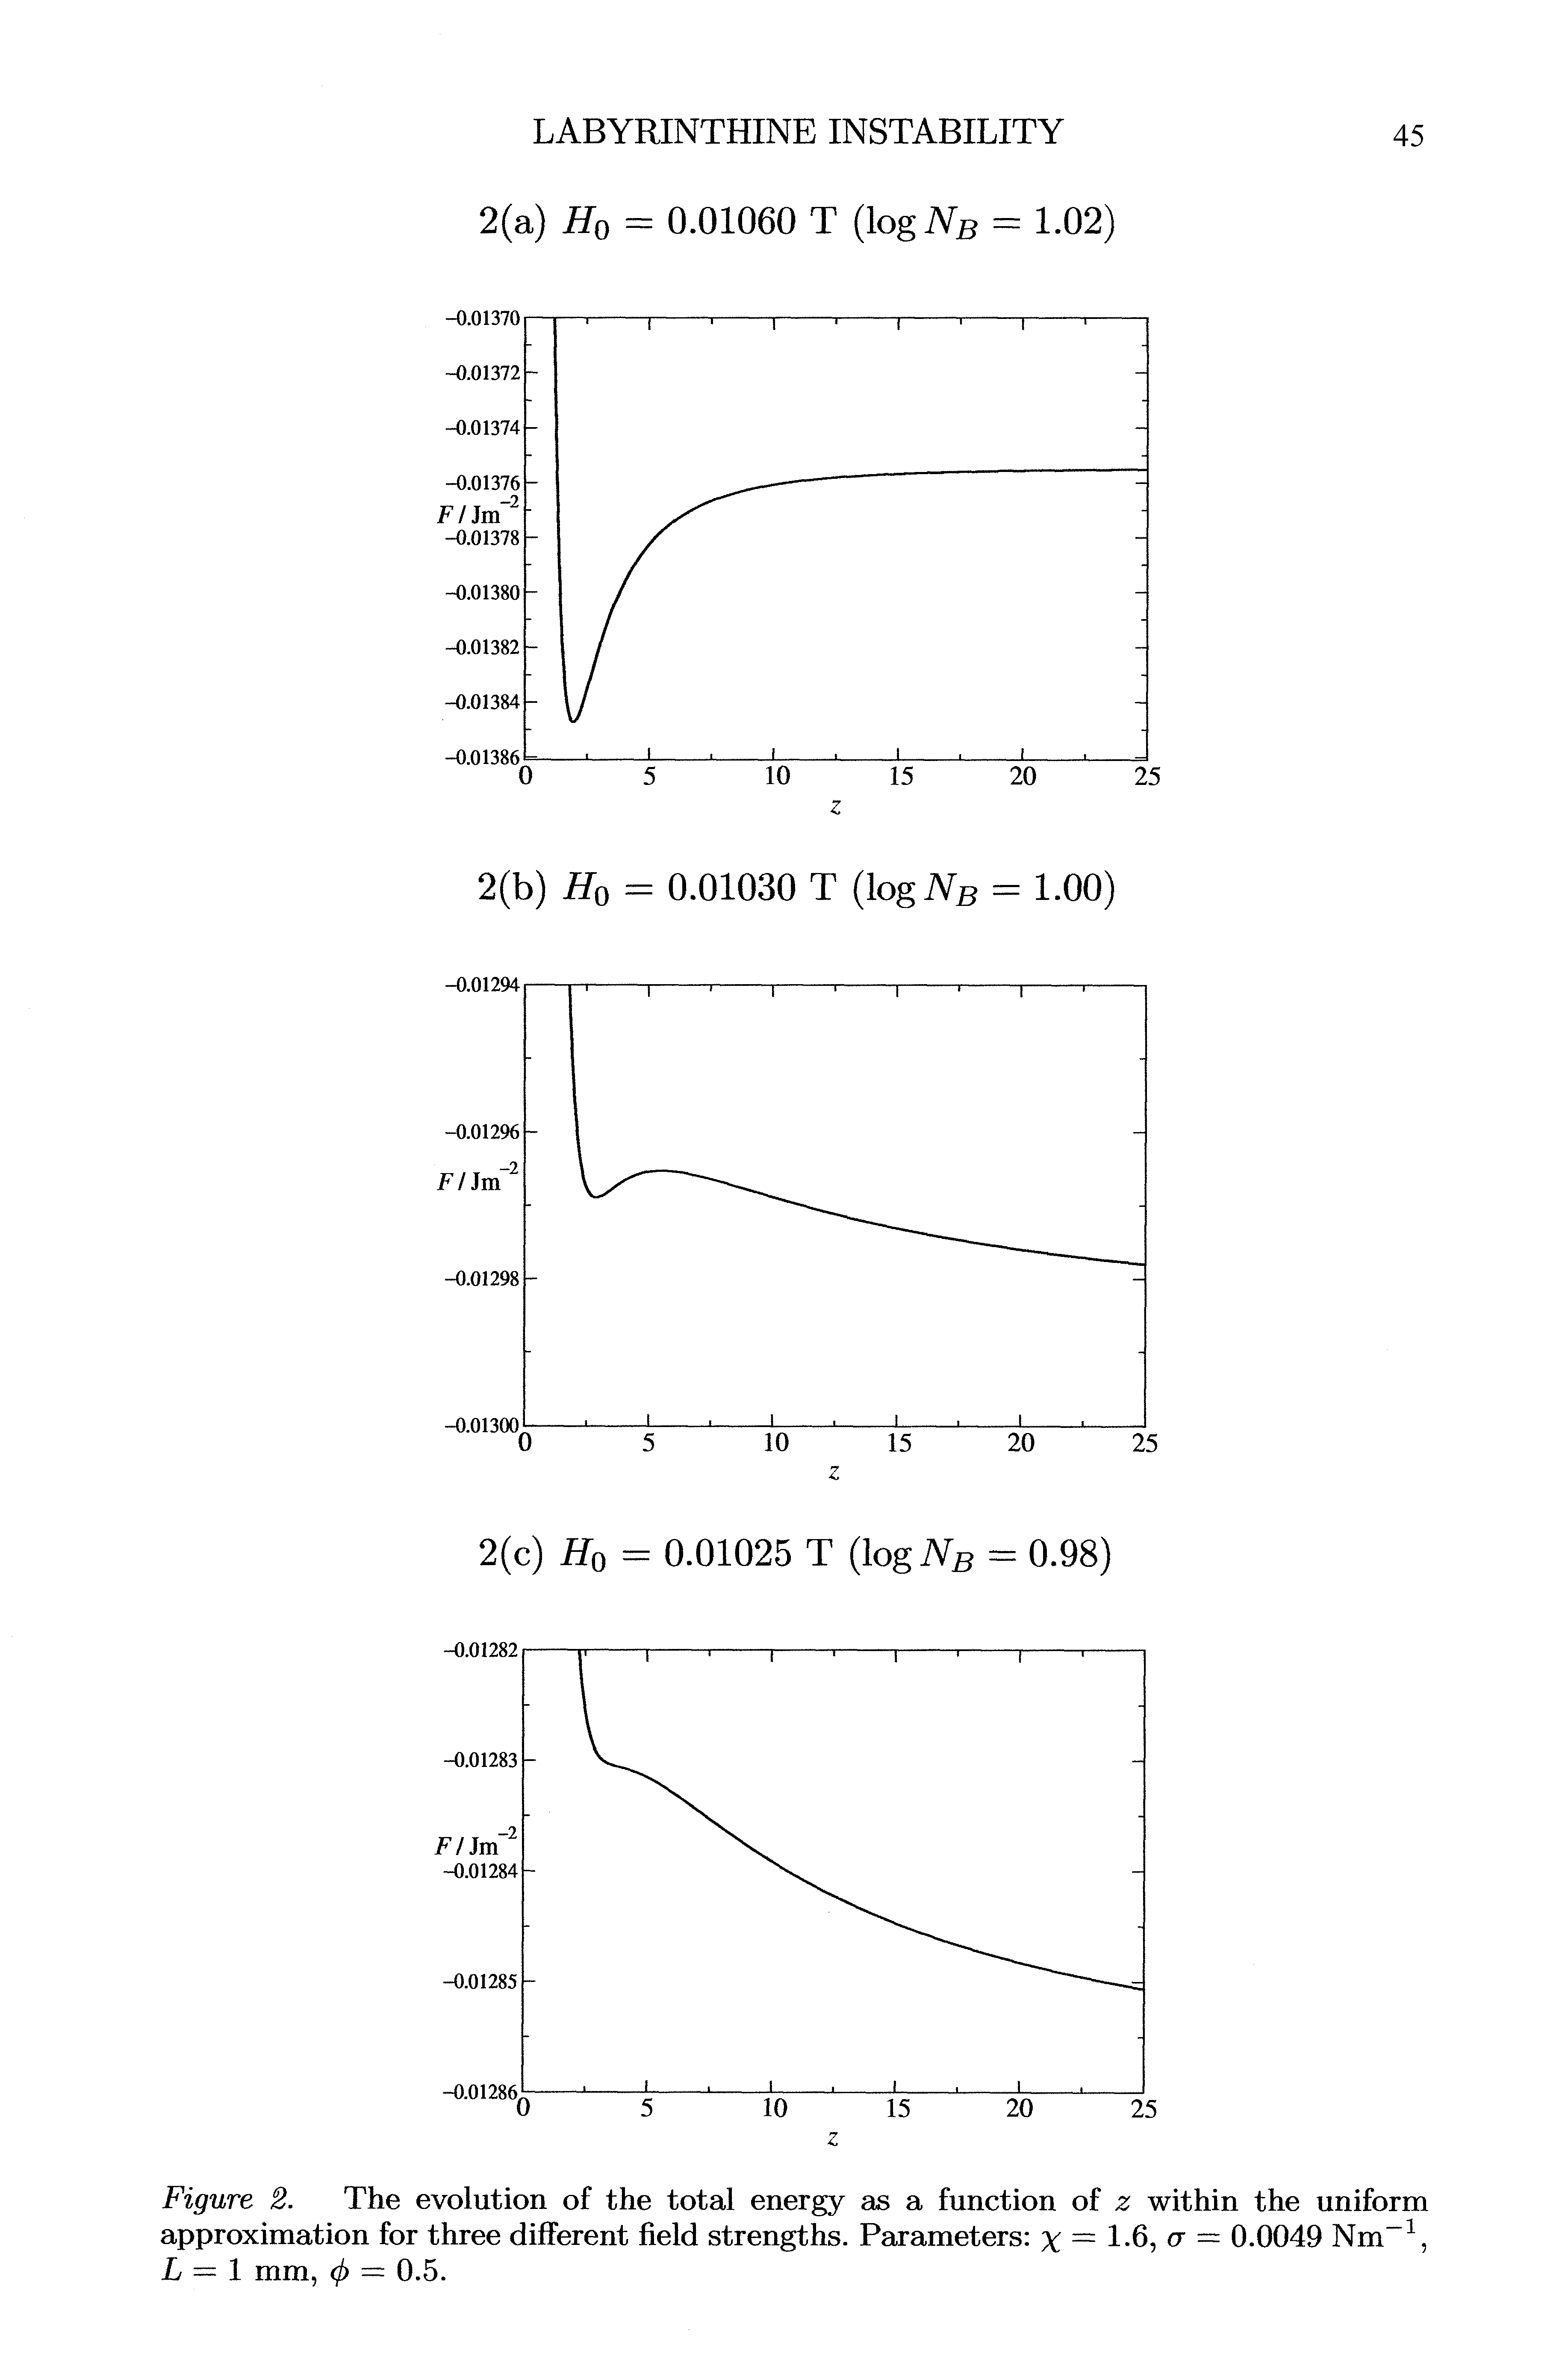 Figure 2. The evolution of the total energy as a function of within the uniform approximation for three different field strengths. Parameters x = l-6> o = 0.0049 Nm , L = 1 mm, (f> = 0.5.